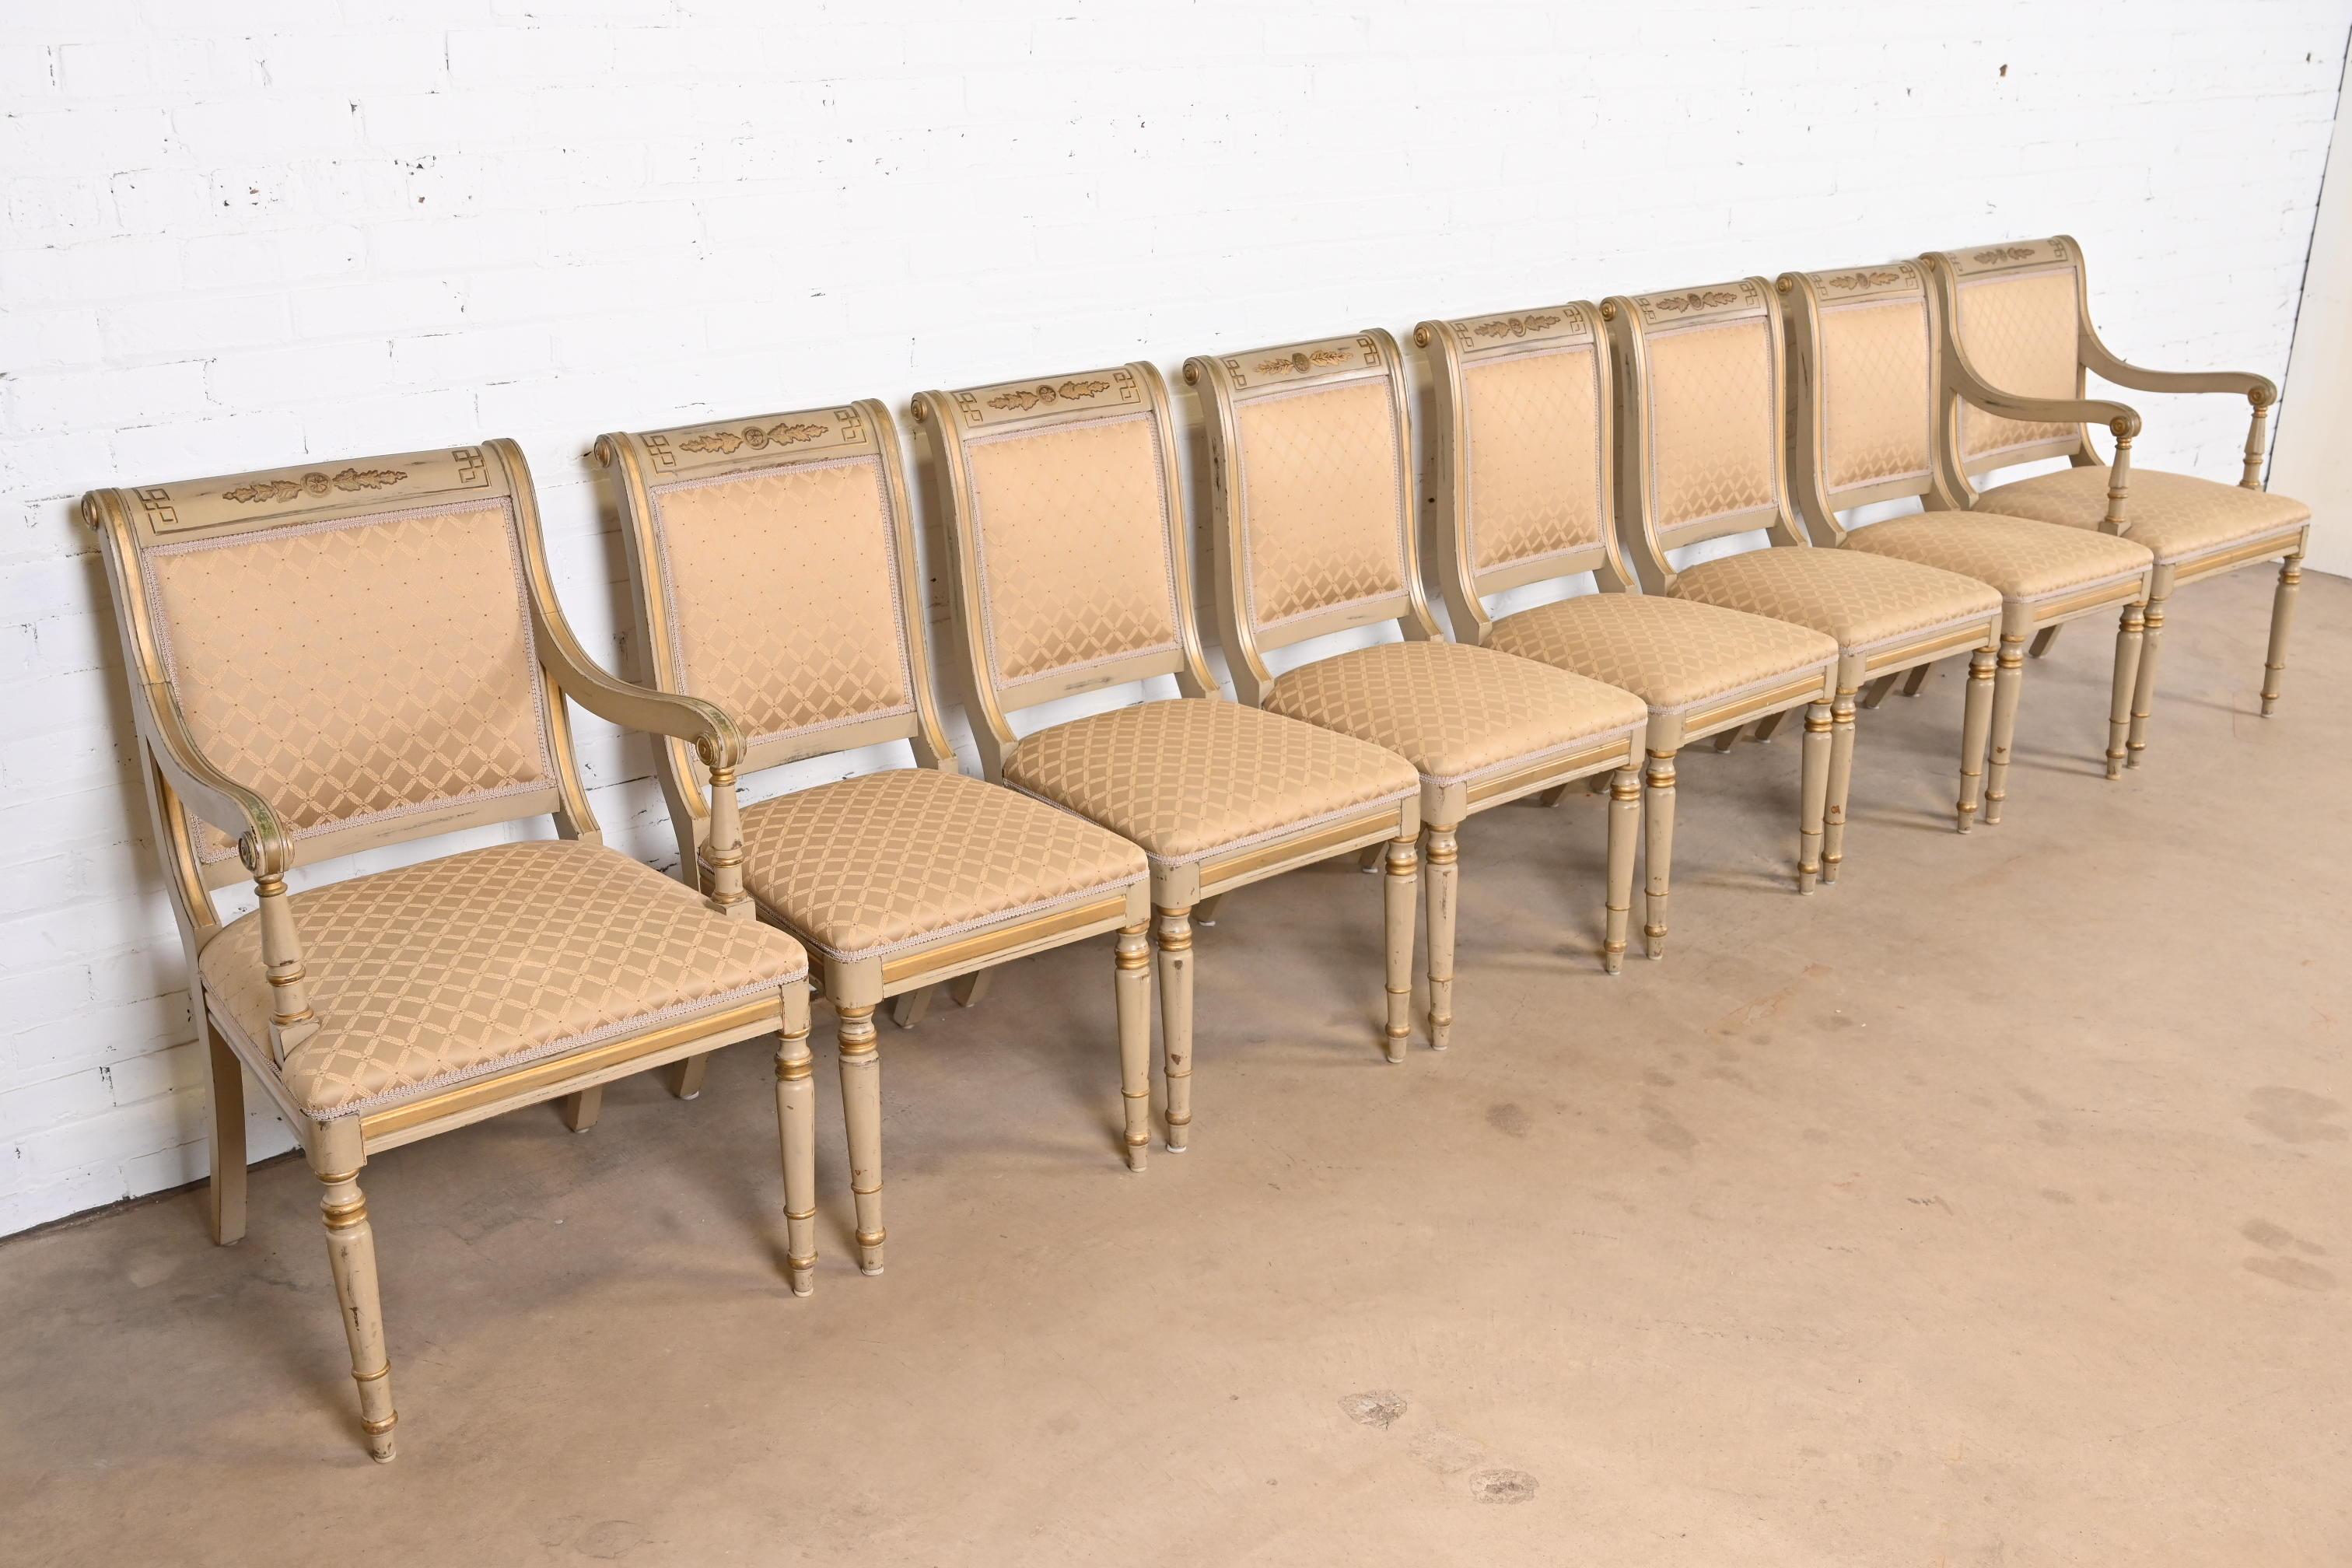 20th Century French Regency Louis XVI Hand-Painted and Gold Gilt Dining Chairs, Set of Eight For Sale